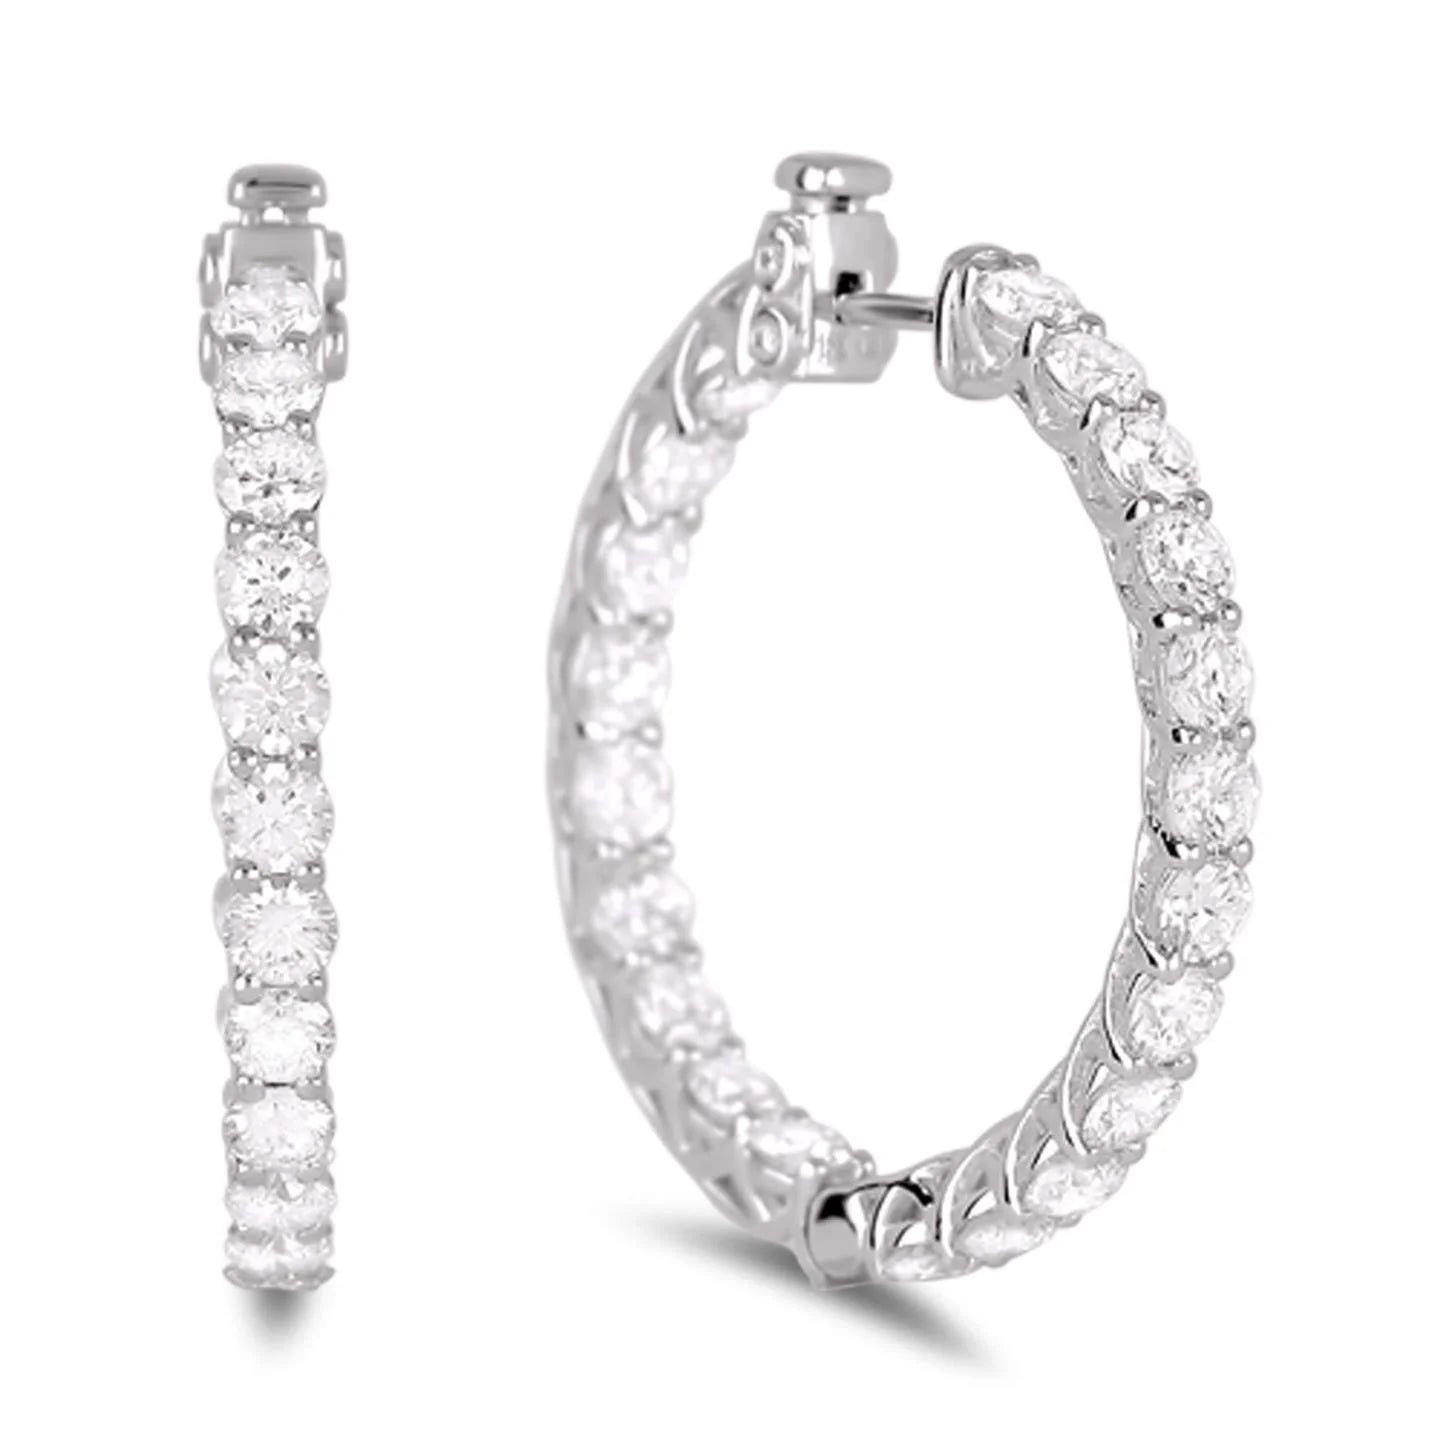 Real Gorgeous Round Cut Diamond Hoop Earring White Gold 4.10 Carats